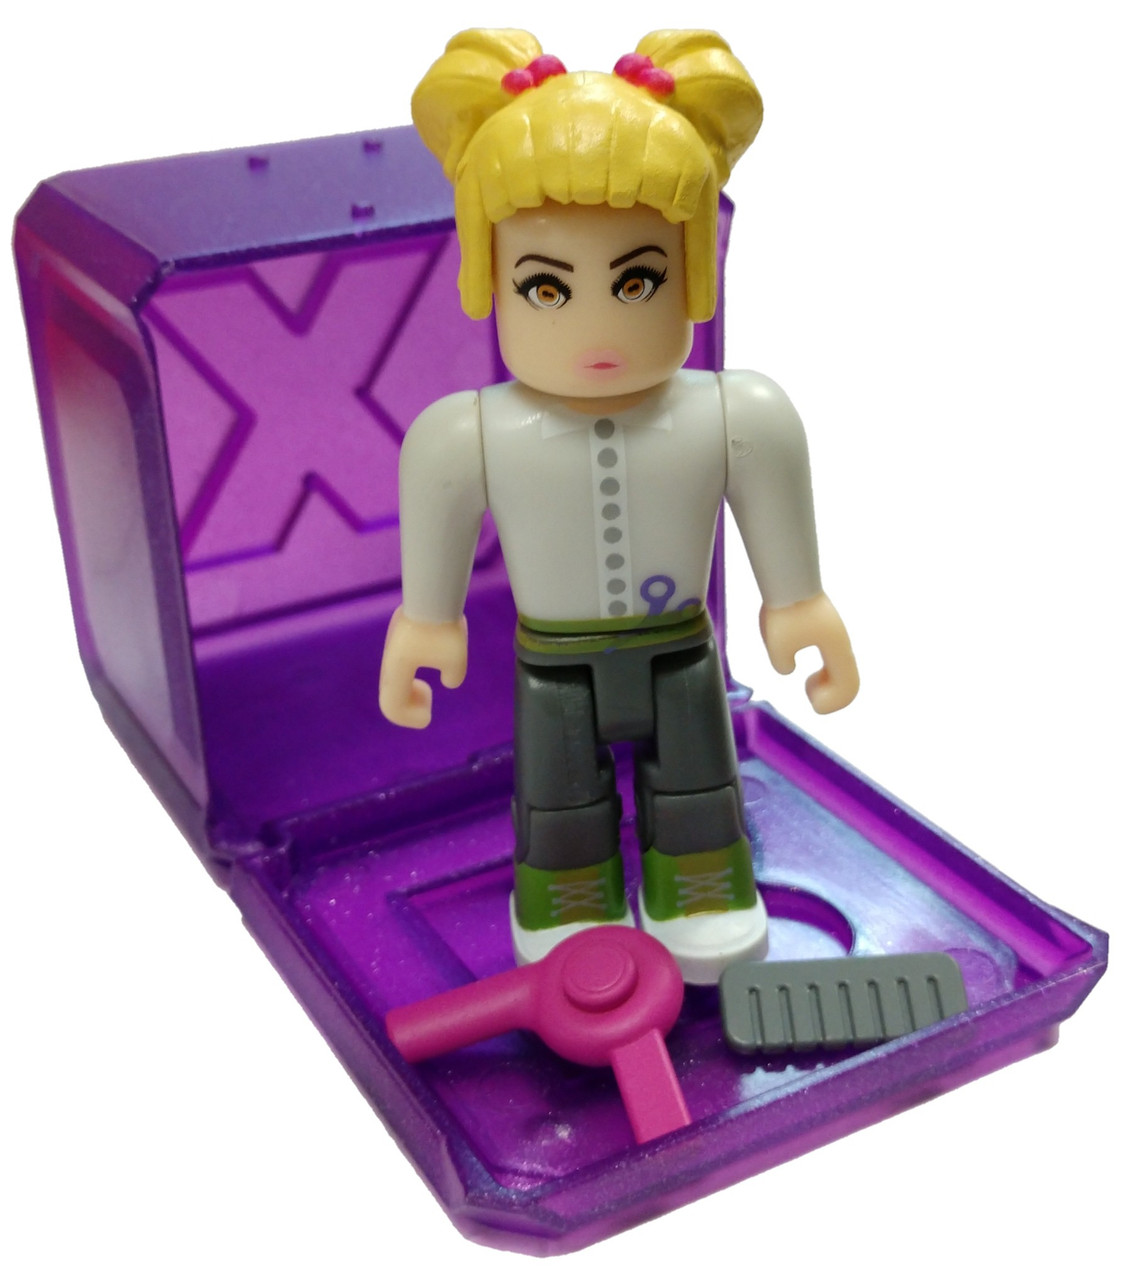 Roblox Celebrity Collection Series 3 Stylz Salon Vip Stylist Mini - roblox celebrity collection series 3 stylz salon vip stylist mini figure with cube and